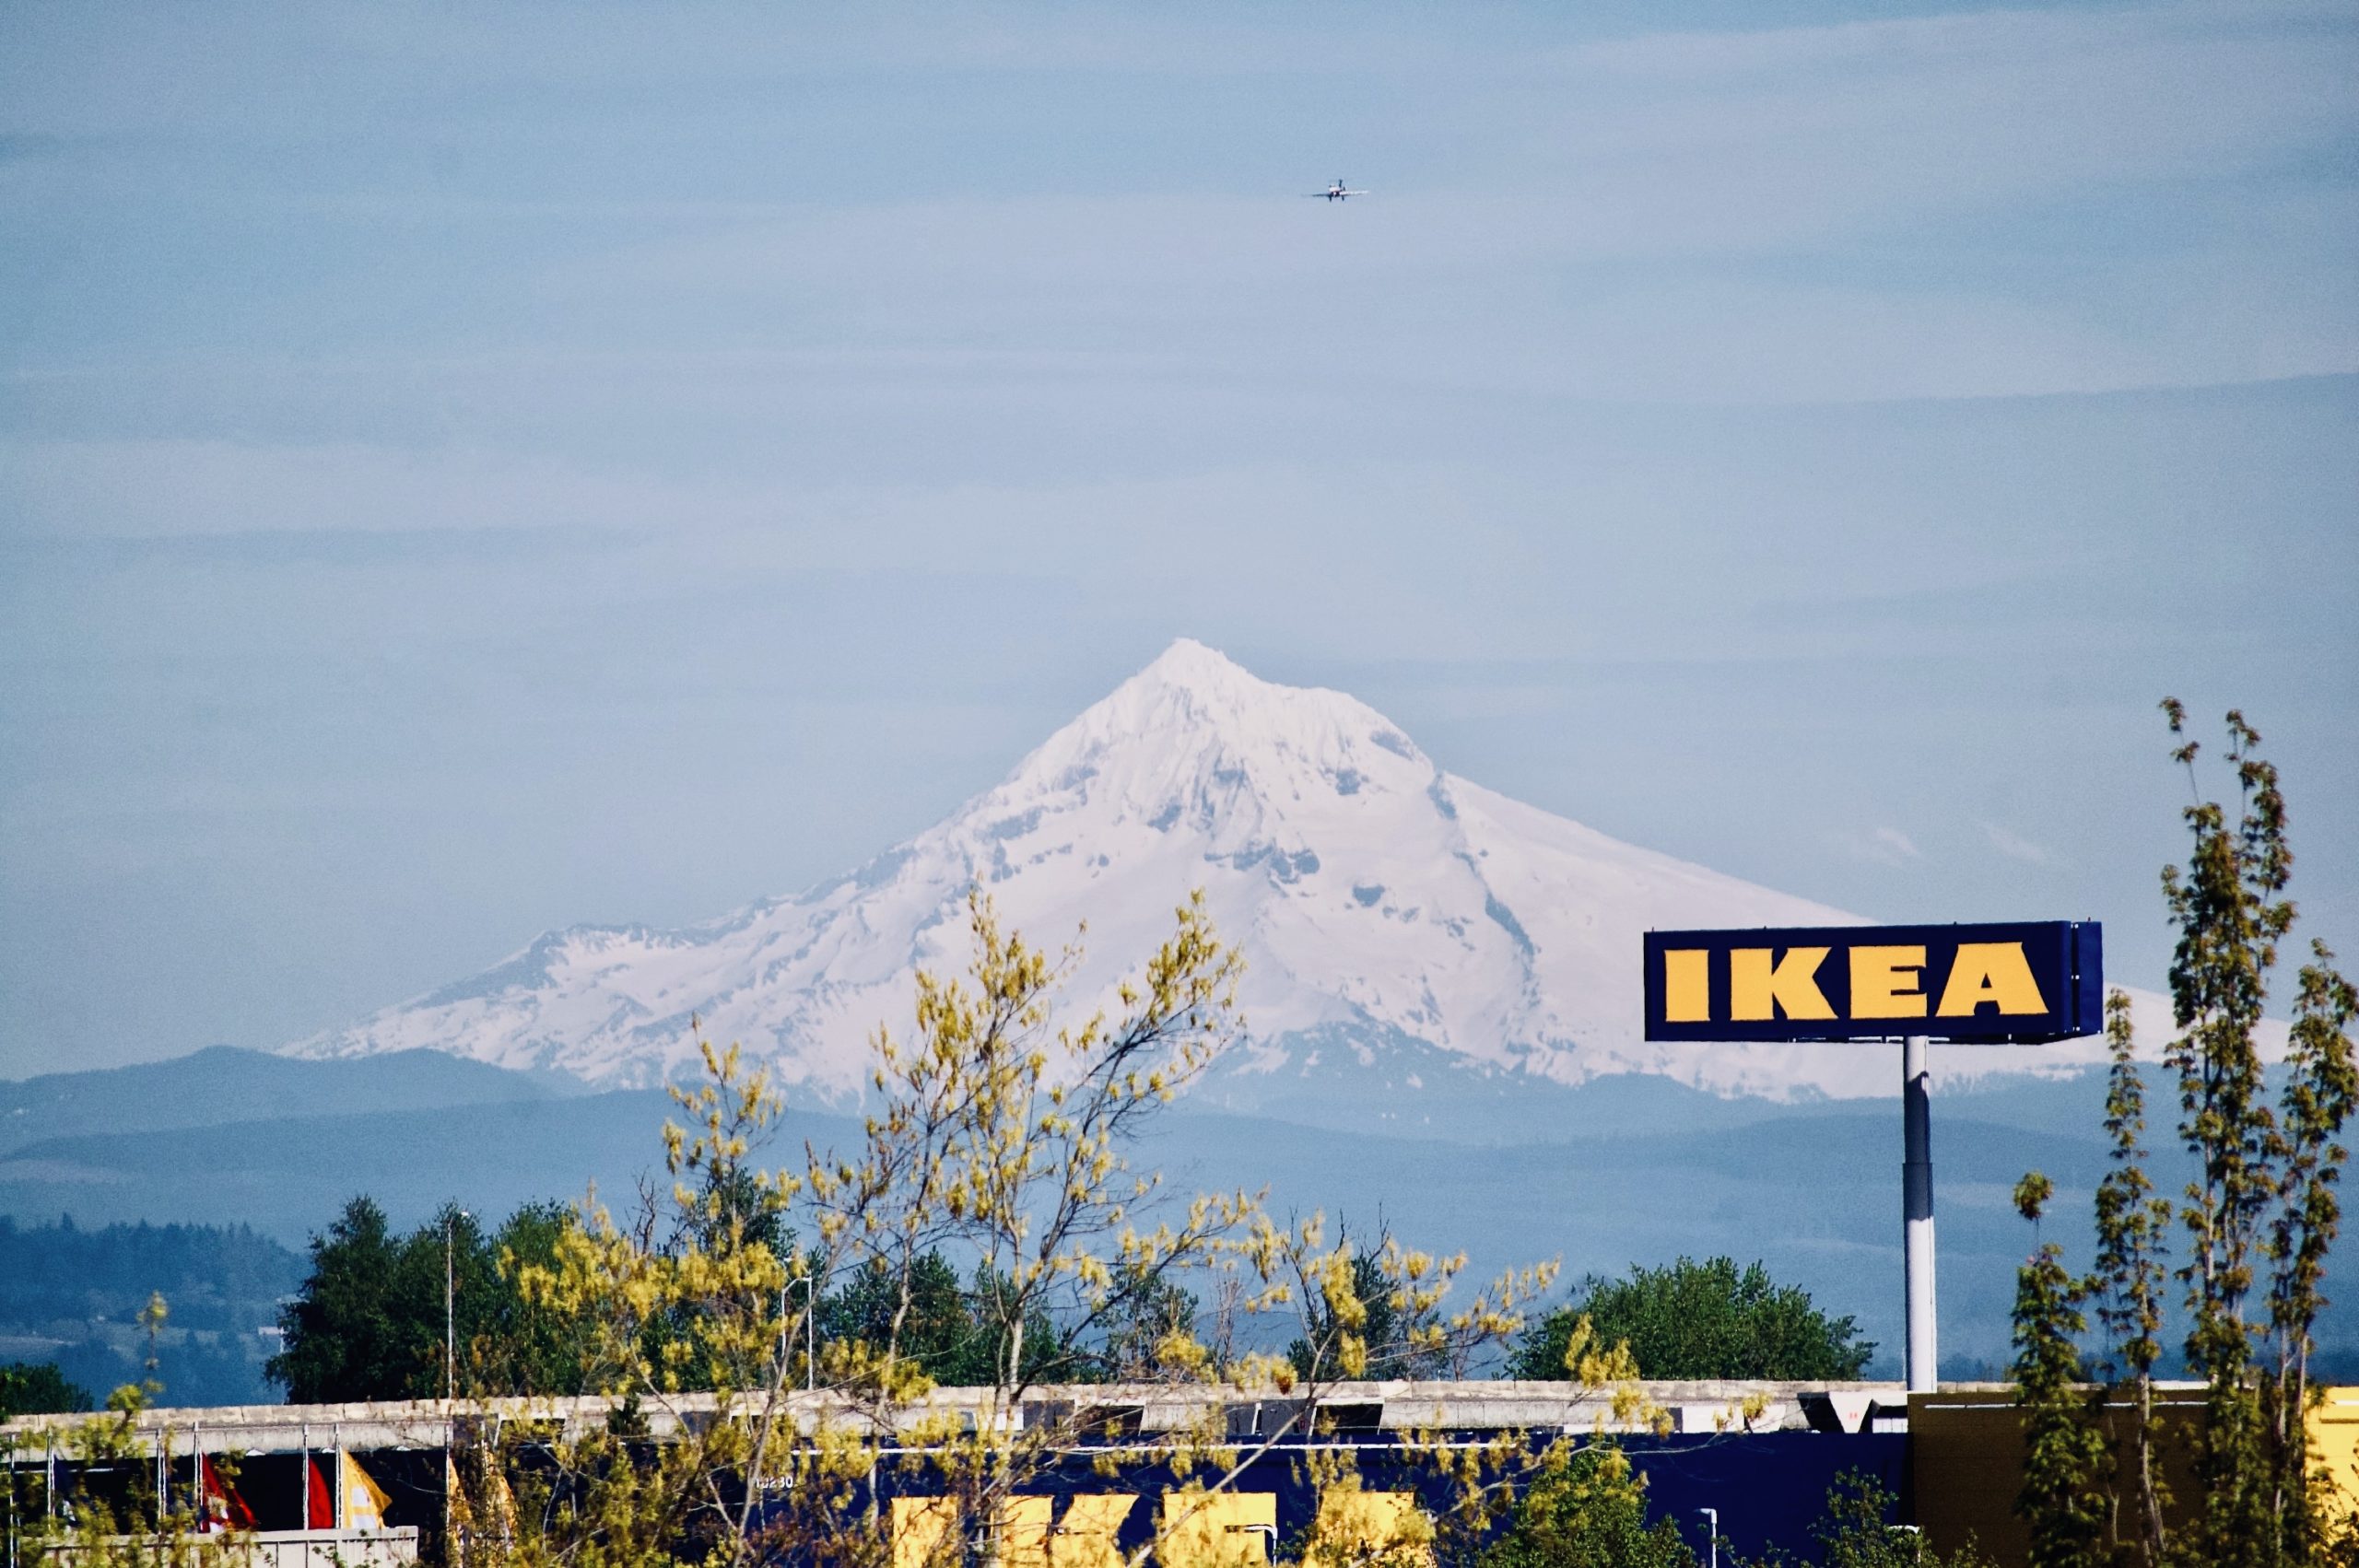 Mt. Hood as seen from Aloft hotel by PDX airport with Ikea sign and airplane on approach to land